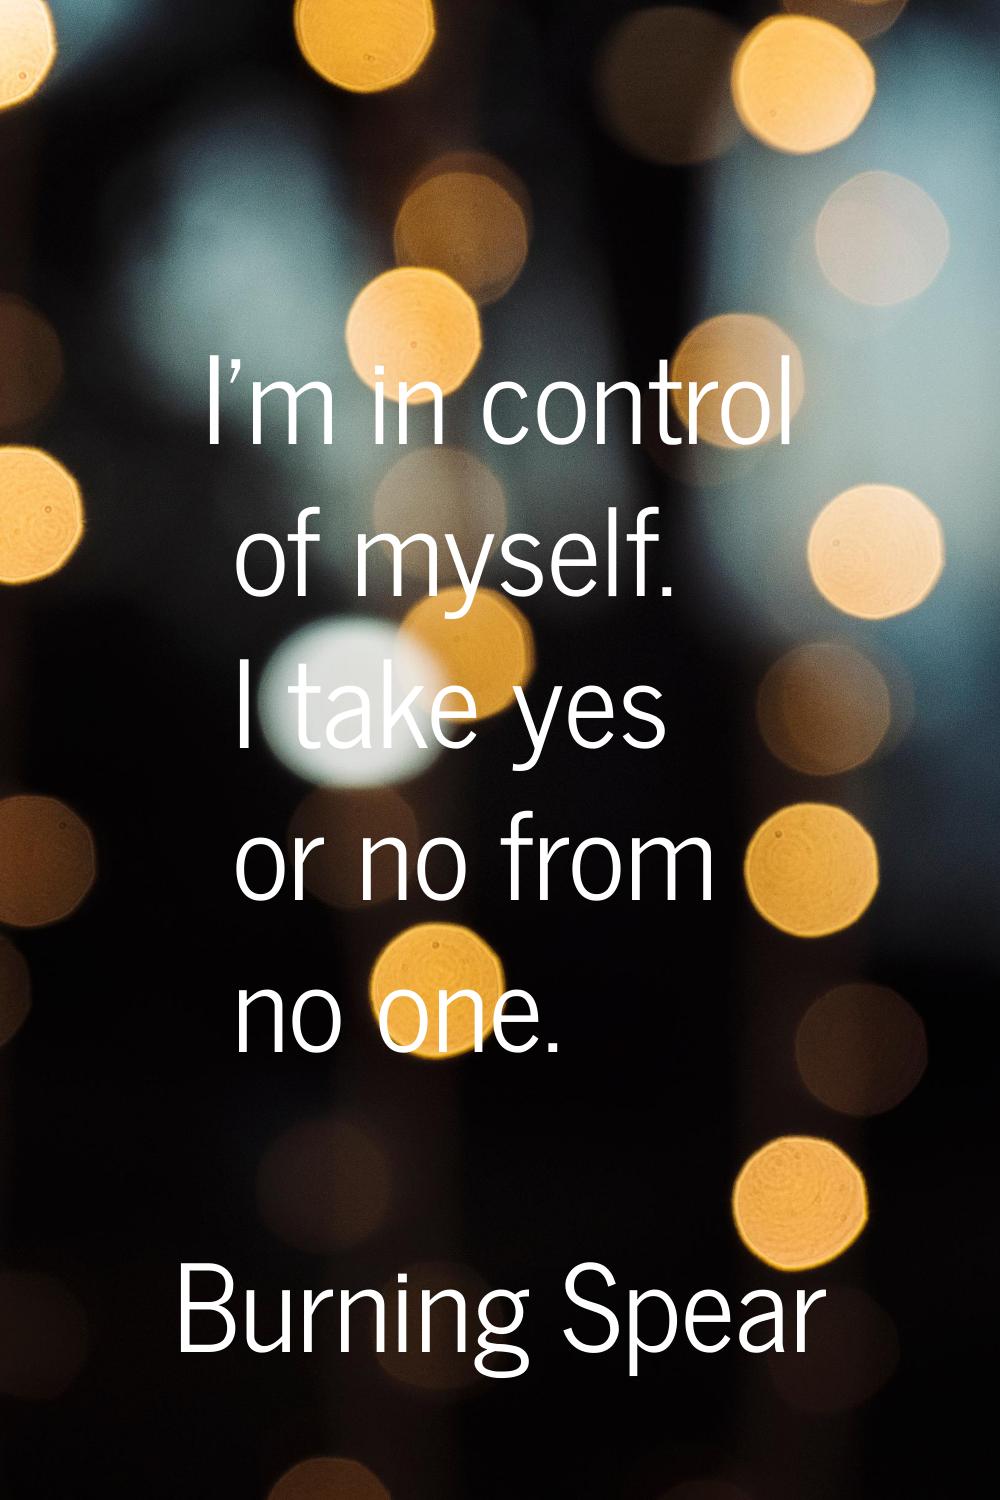 I'm in control of myself. I take yes or no from no one.